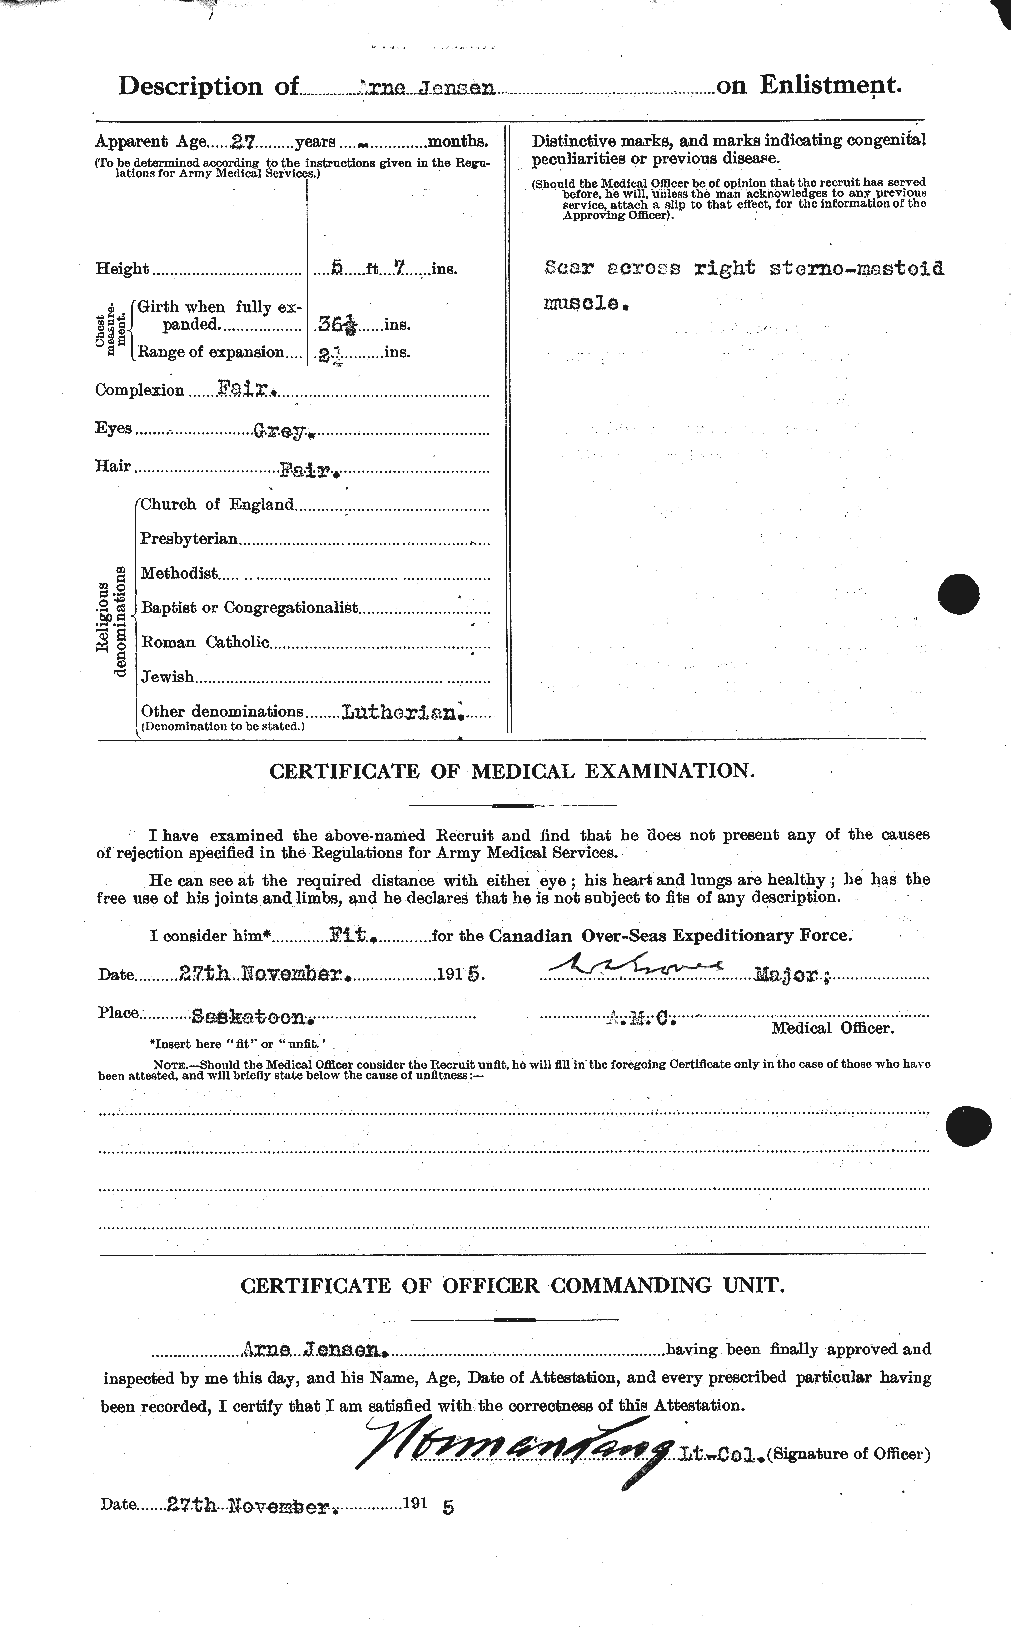 Personnel Records of the First World War - CEF 421541b